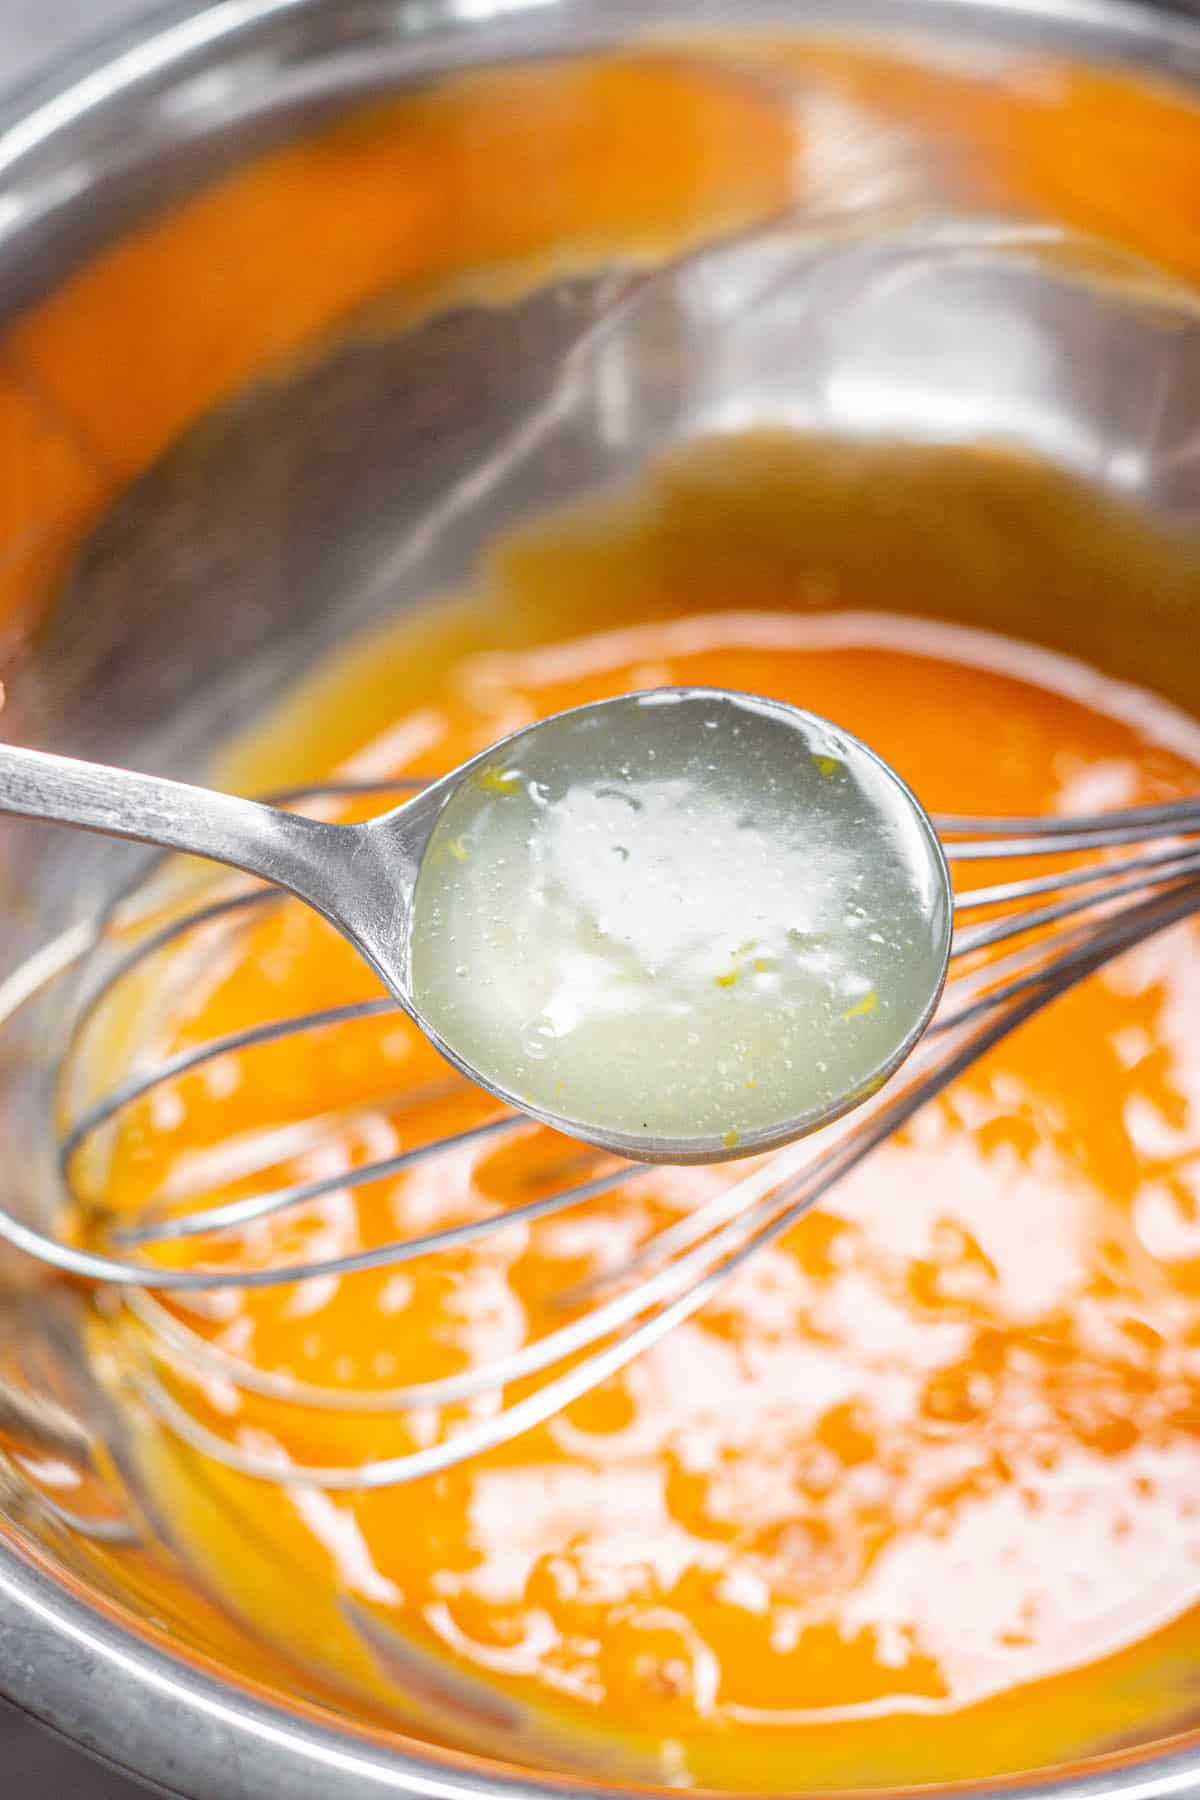 spoon ful of hot curd added to egg yolks.